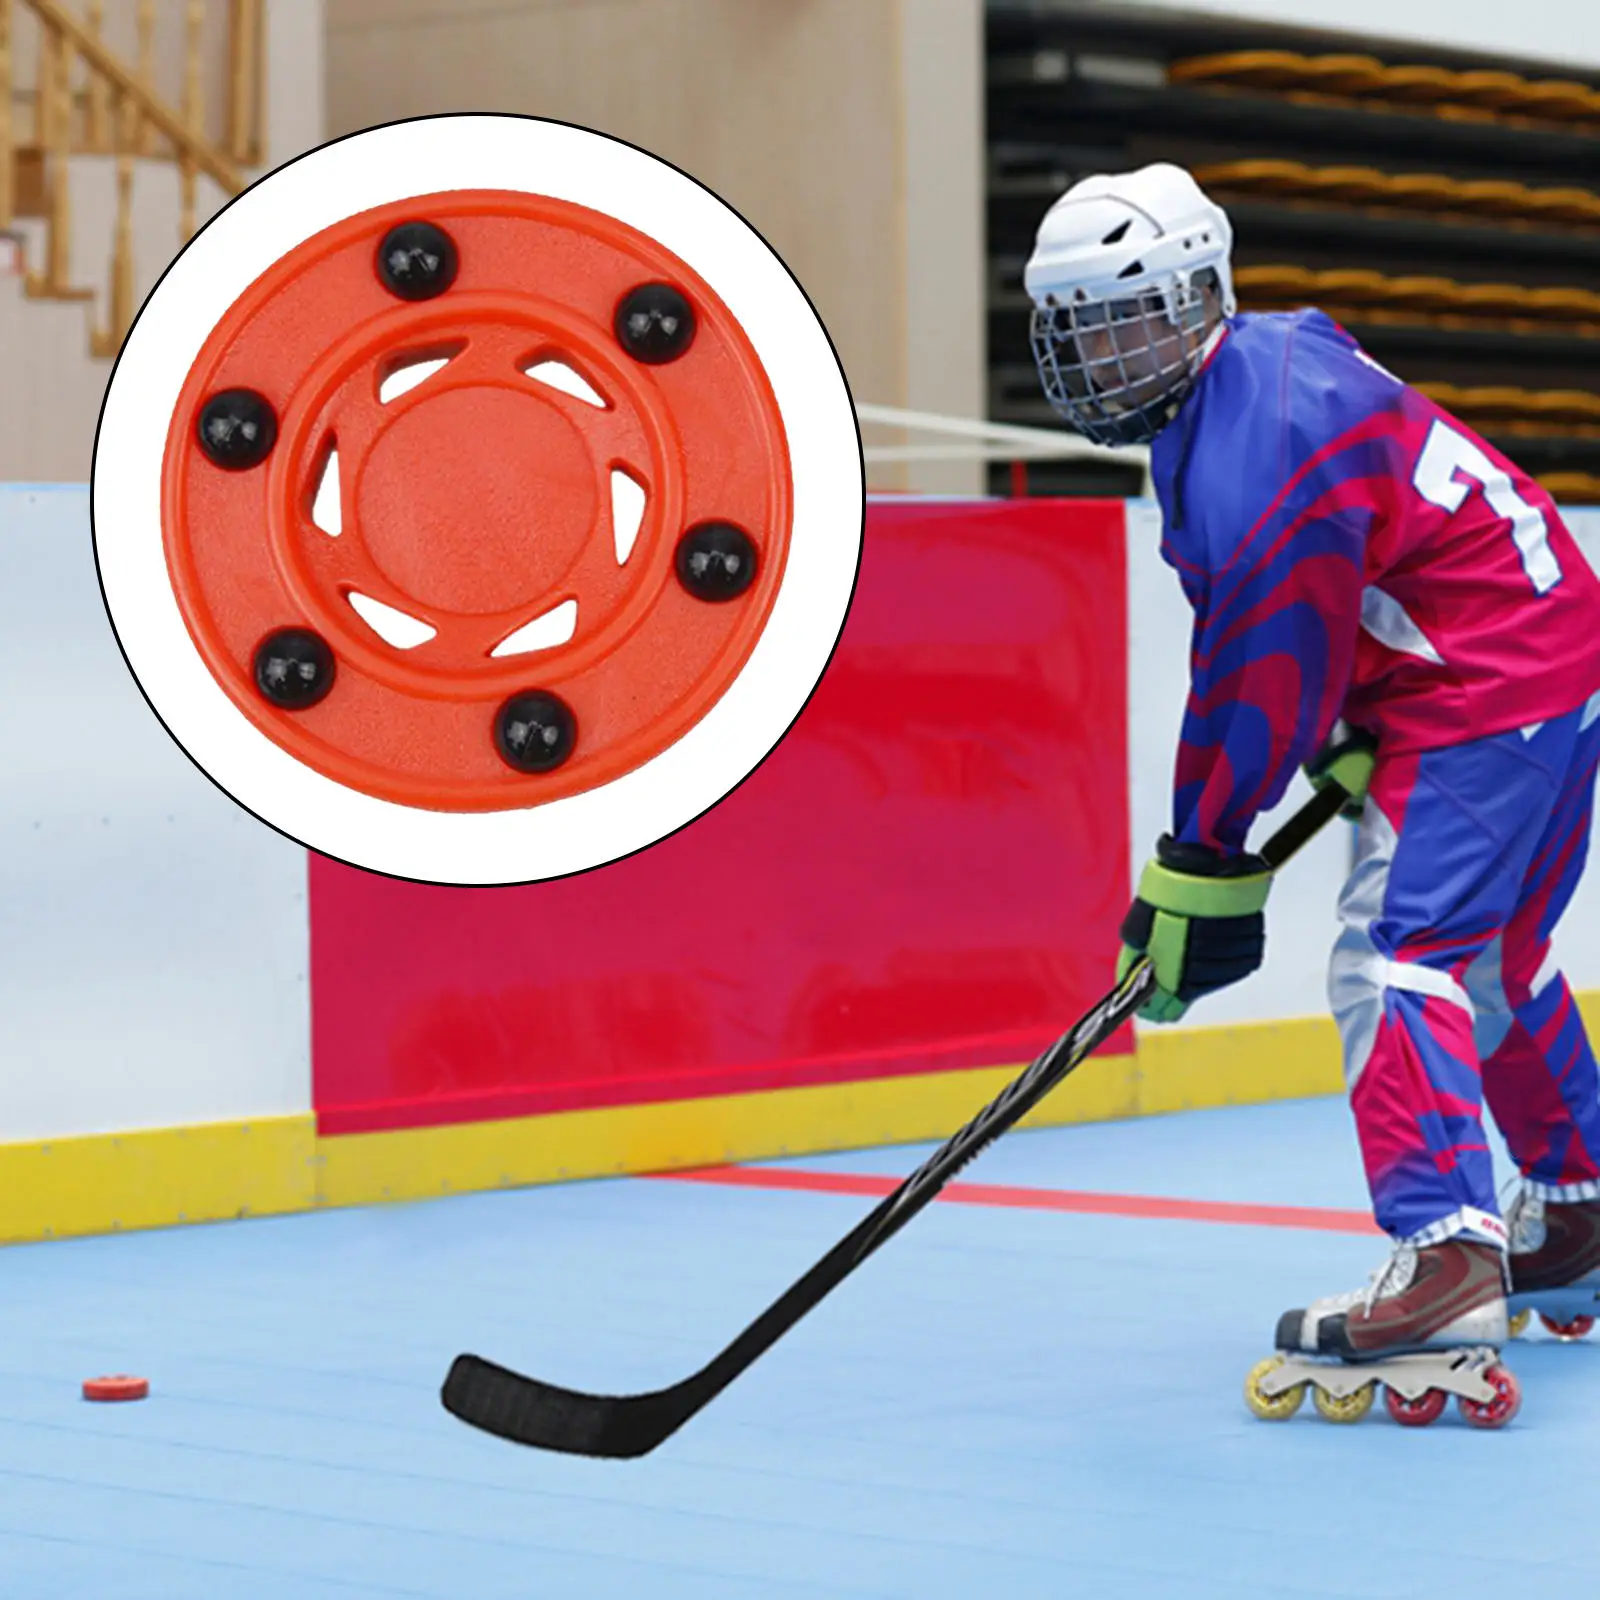 Details about   1pcs Ice Hockey Ball Pucks Rubber Hockey Game Dedicated Training Supplies Balls 